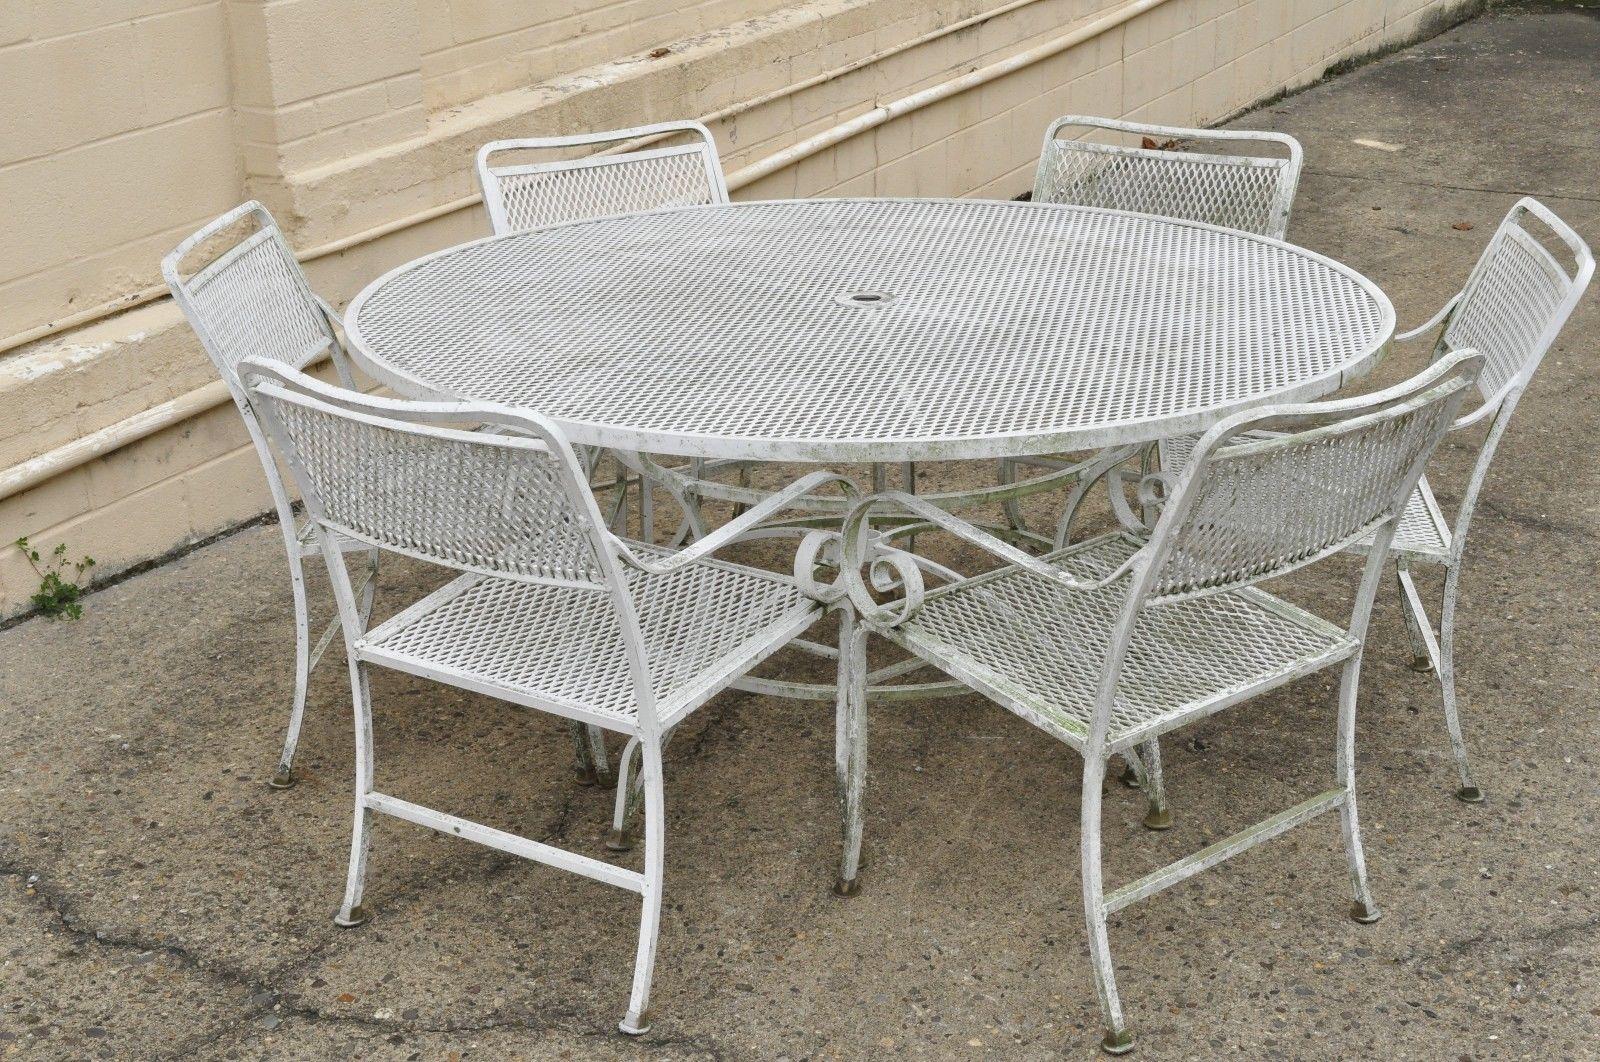 Seven-Piece Cast Aluminium Scroll Arm Metal Patio Dining Set Table & Six Chairs 3